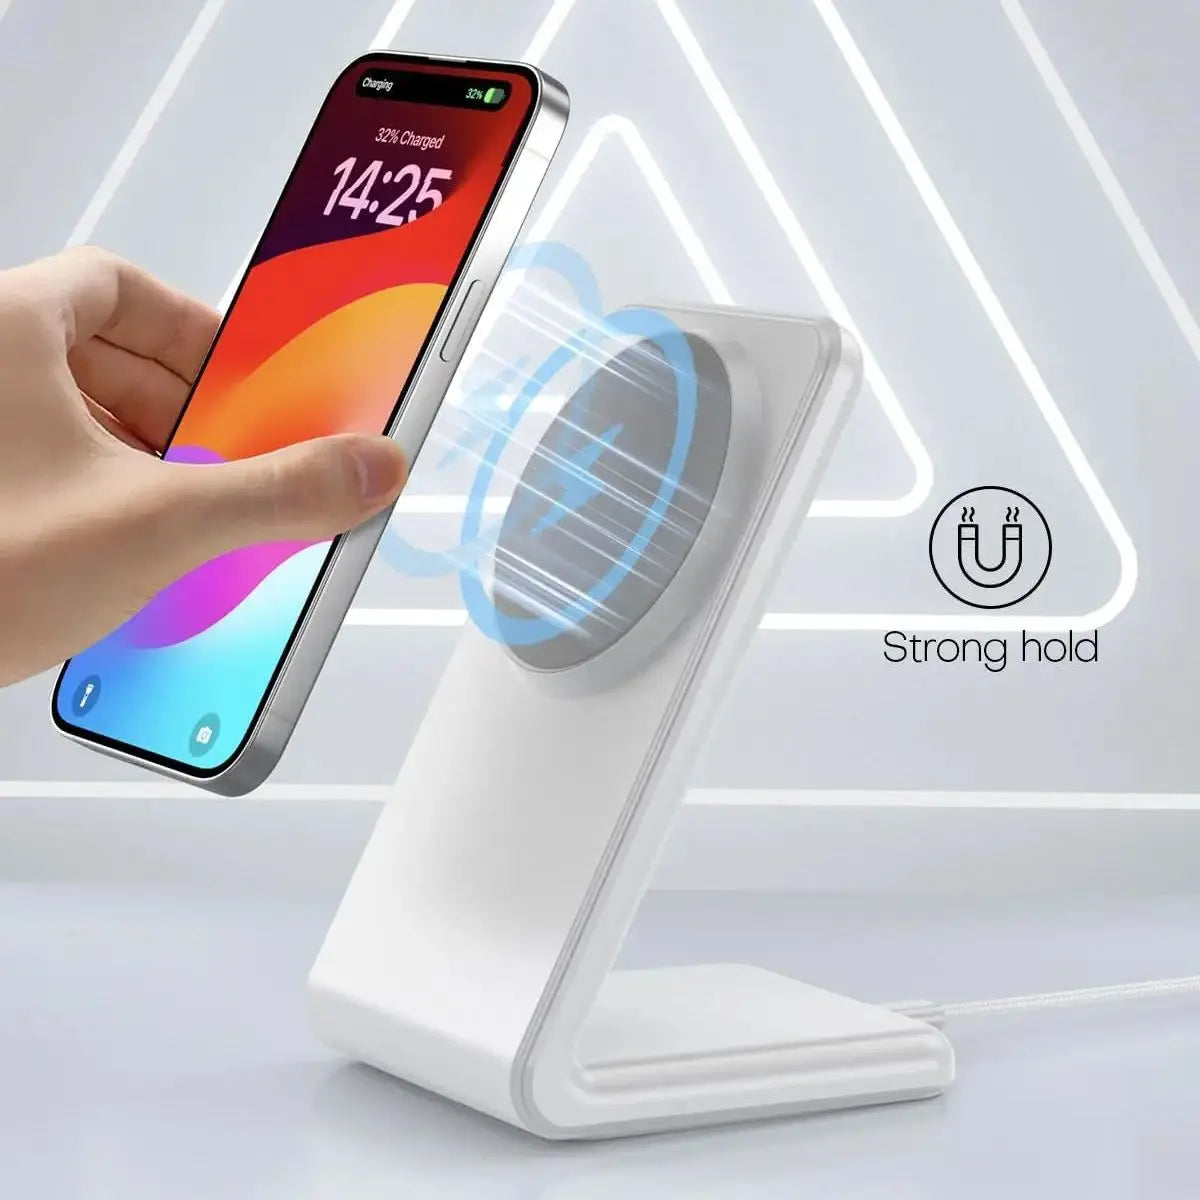 Magnetic Phone Desk Holder Wireless Charger - 15W Fast Charging